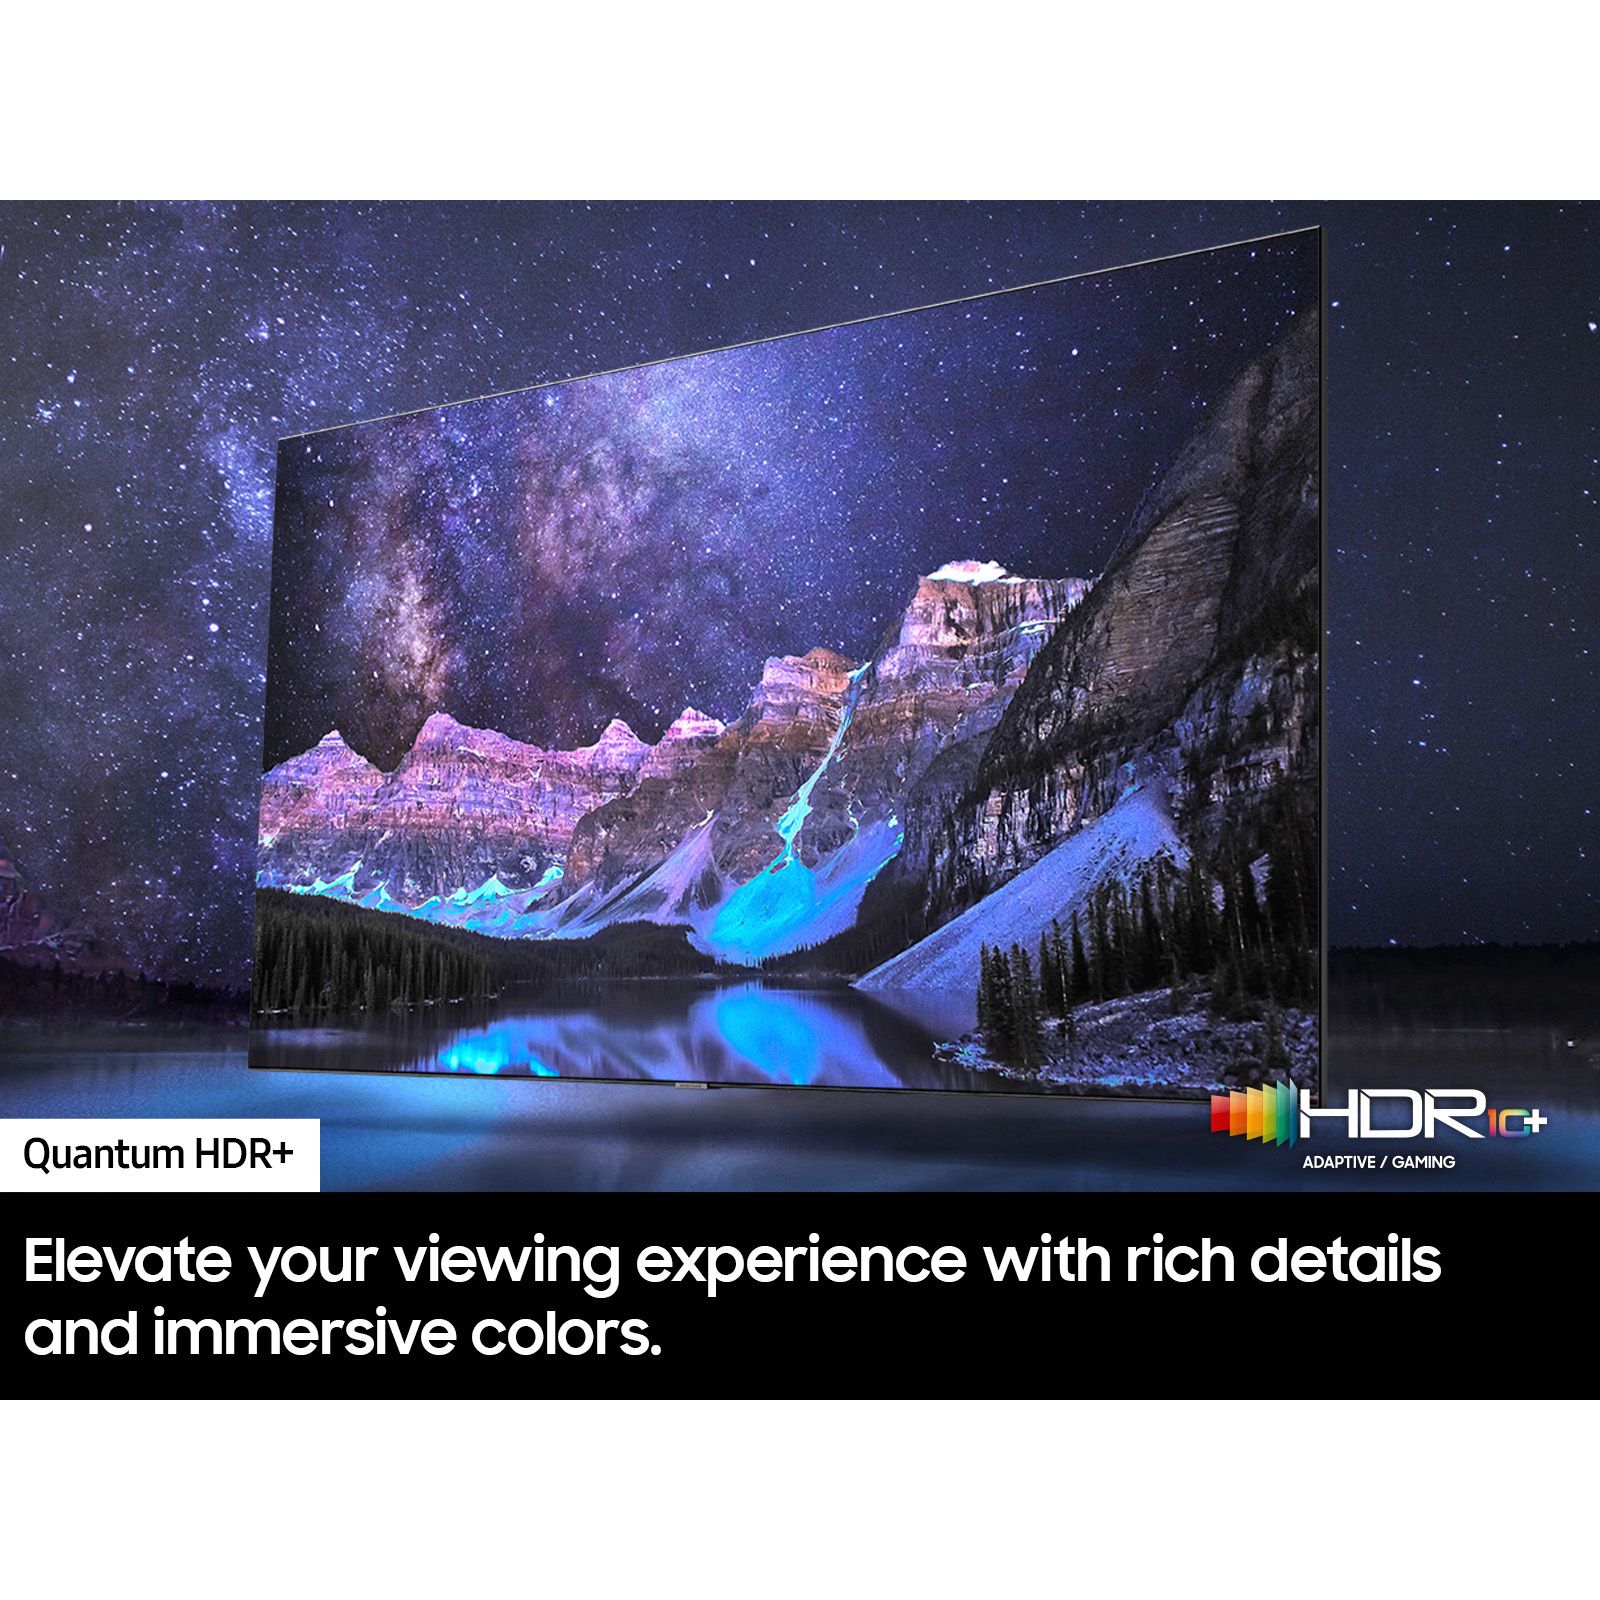 Samsung 85 QN85CD Neo QLED 4K Smart TV with Your Choice Subscription and  5-Year Coverage